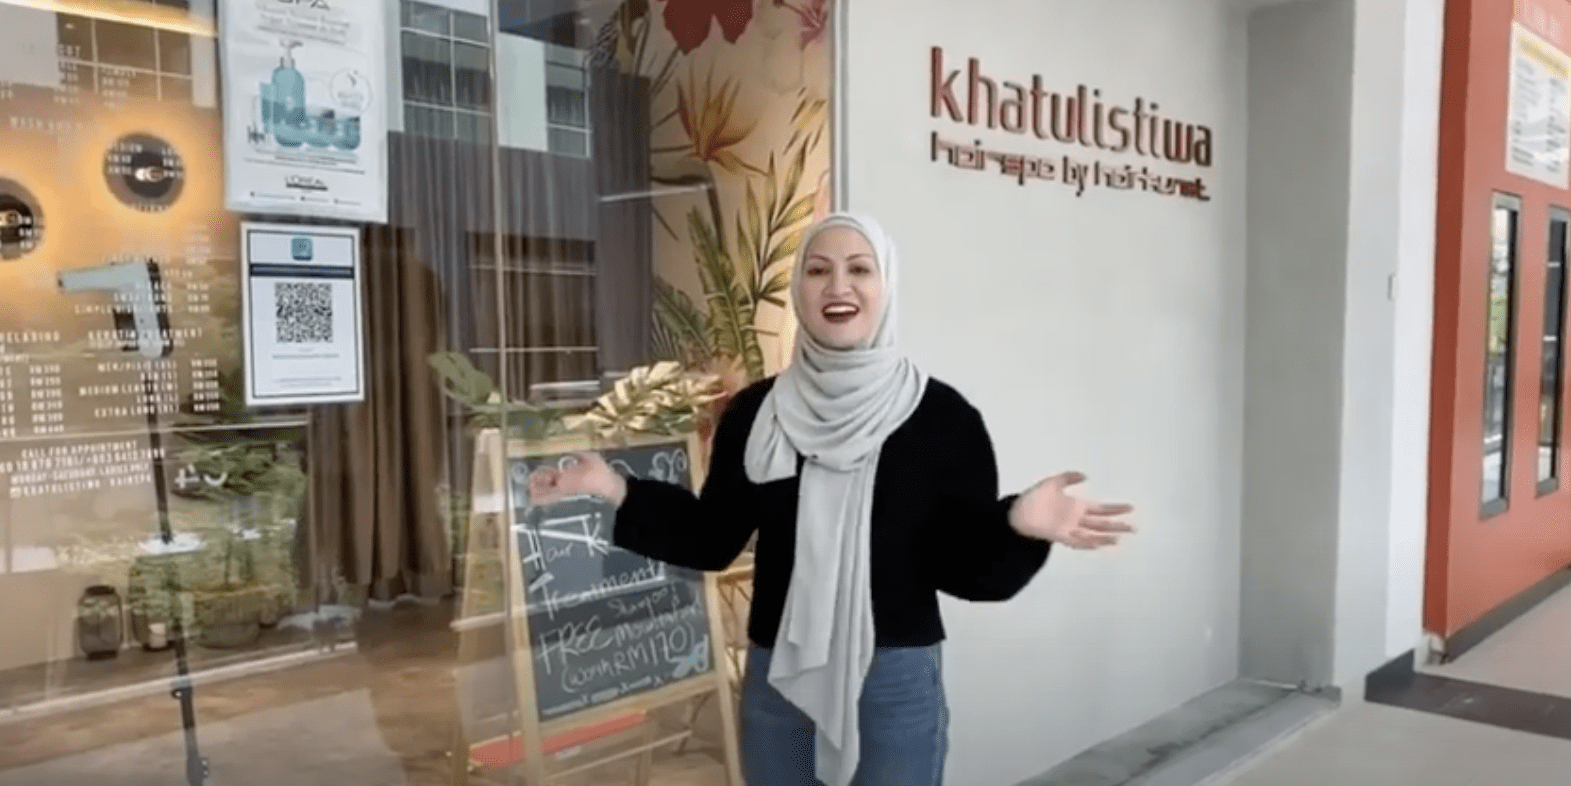 Sherry Ibrahim Gives A Tour Of Her New Business